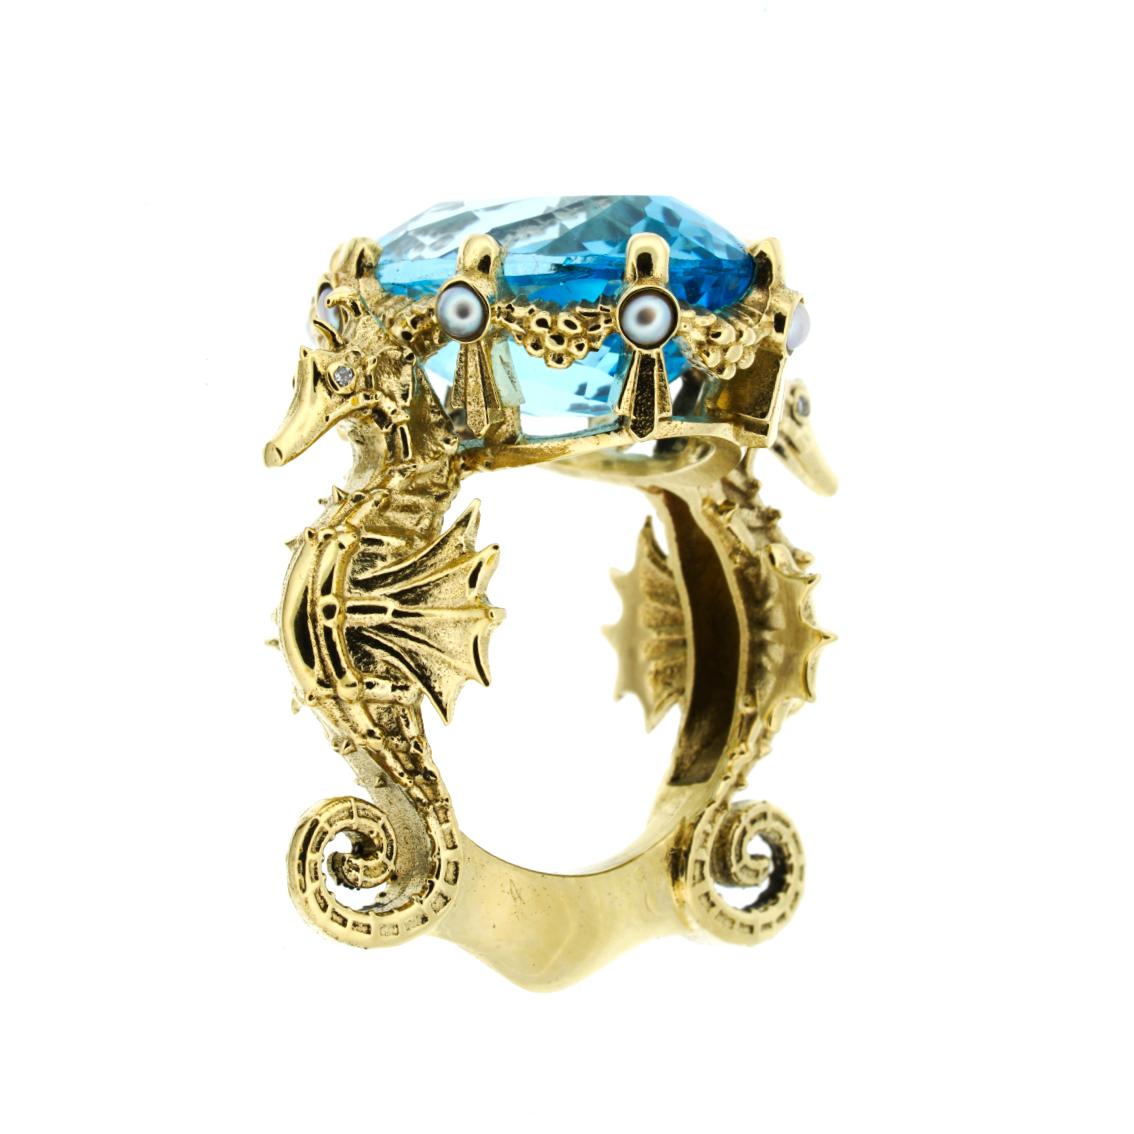 Contemporary 9 Karat Yellow Gold, Swiss Blue Topaz, Diamonds & Pearls Crowned Oceanides Ring